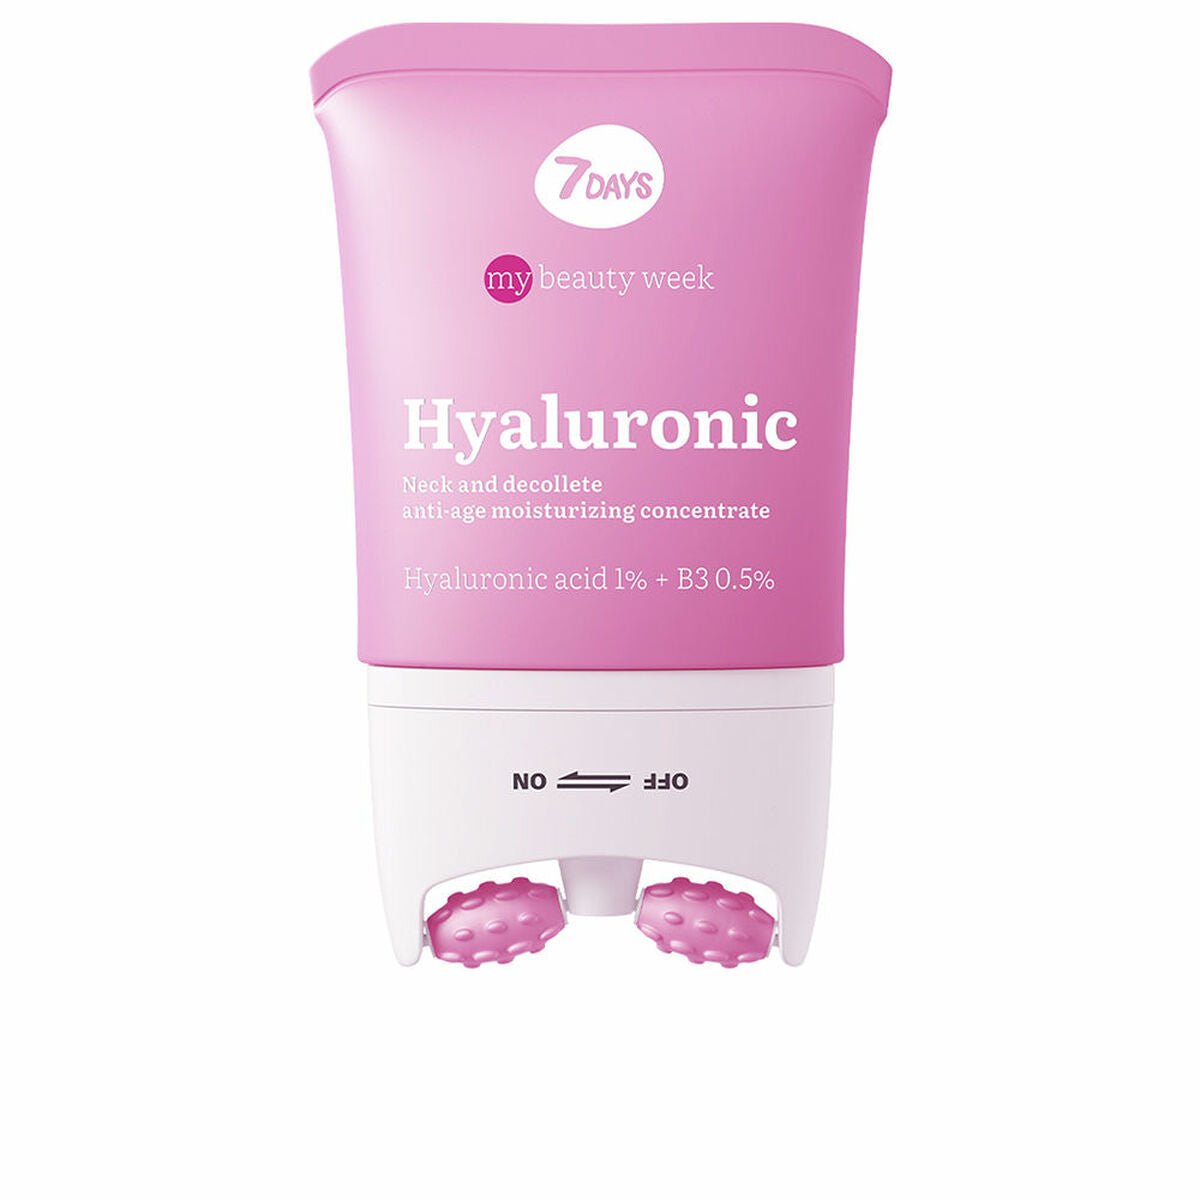 Firming Neck and Décolletage Cream 7DAYS My Beauty Week Hyaluronic 80 ml